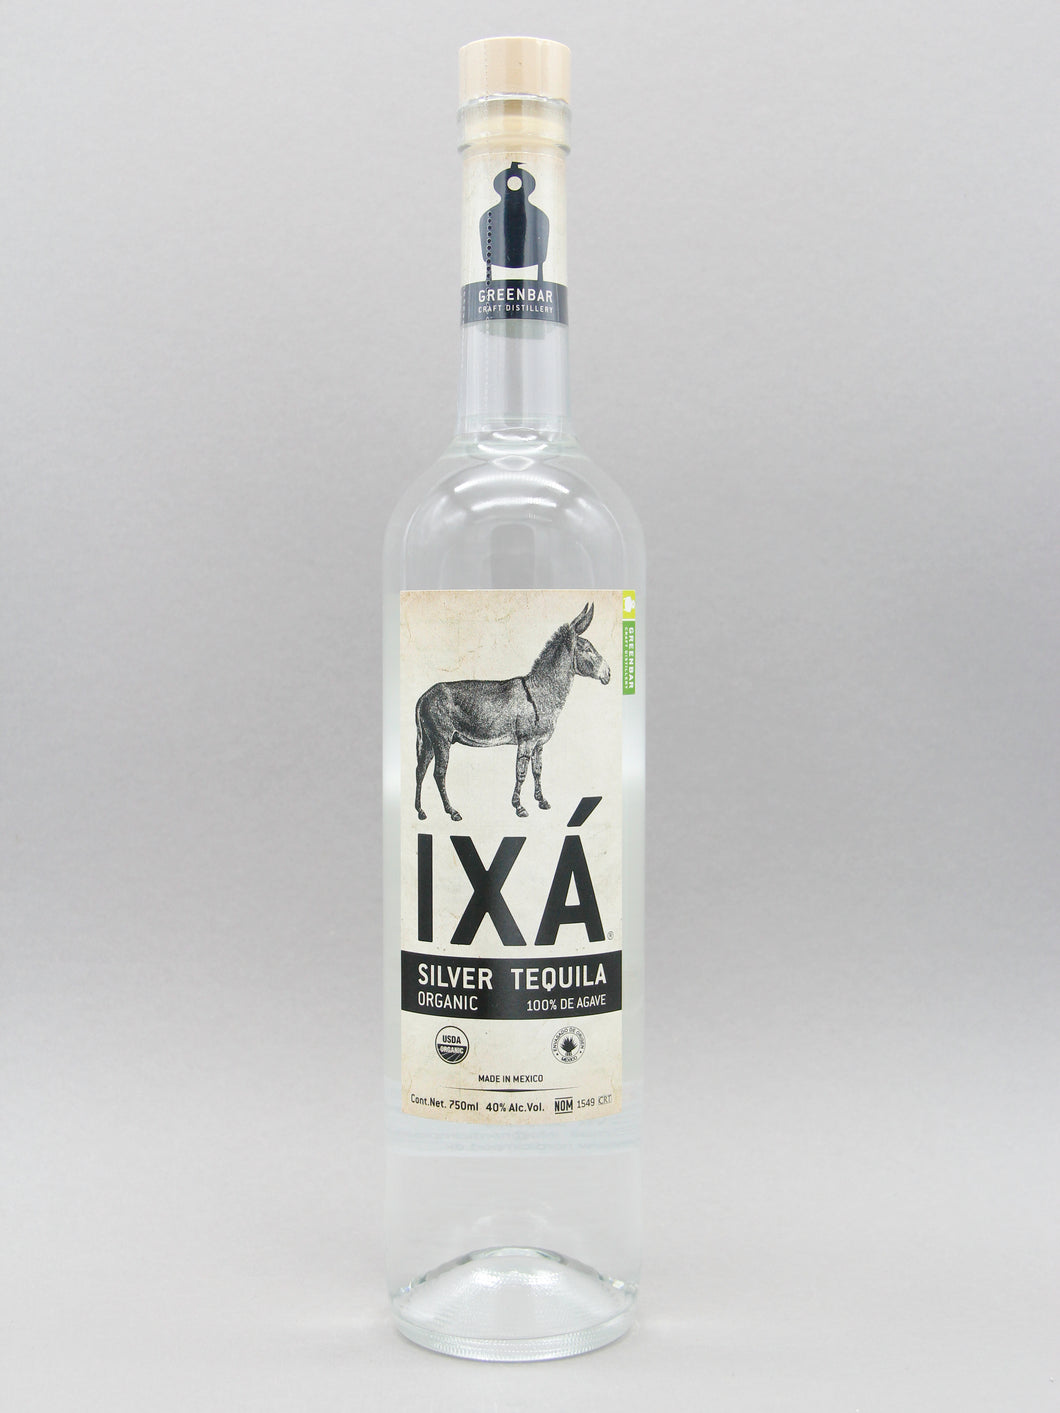 IXA Silver Tequila, 100% Agave, Organic (40%, 70cl)